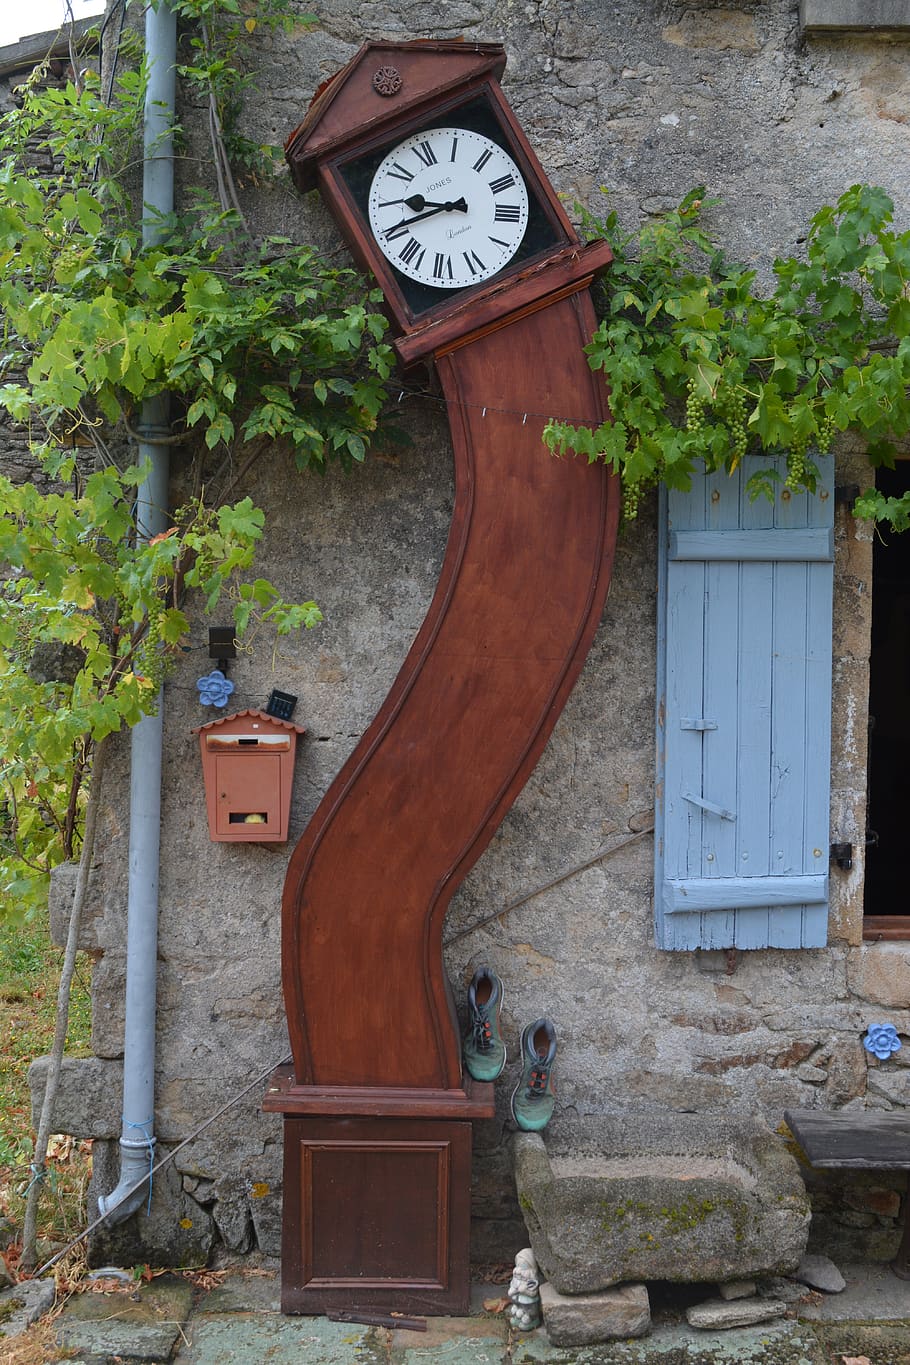 grandfather clock, grapevine, bendy, rustic, wall, outdoors, decor, countryside, plant, clock